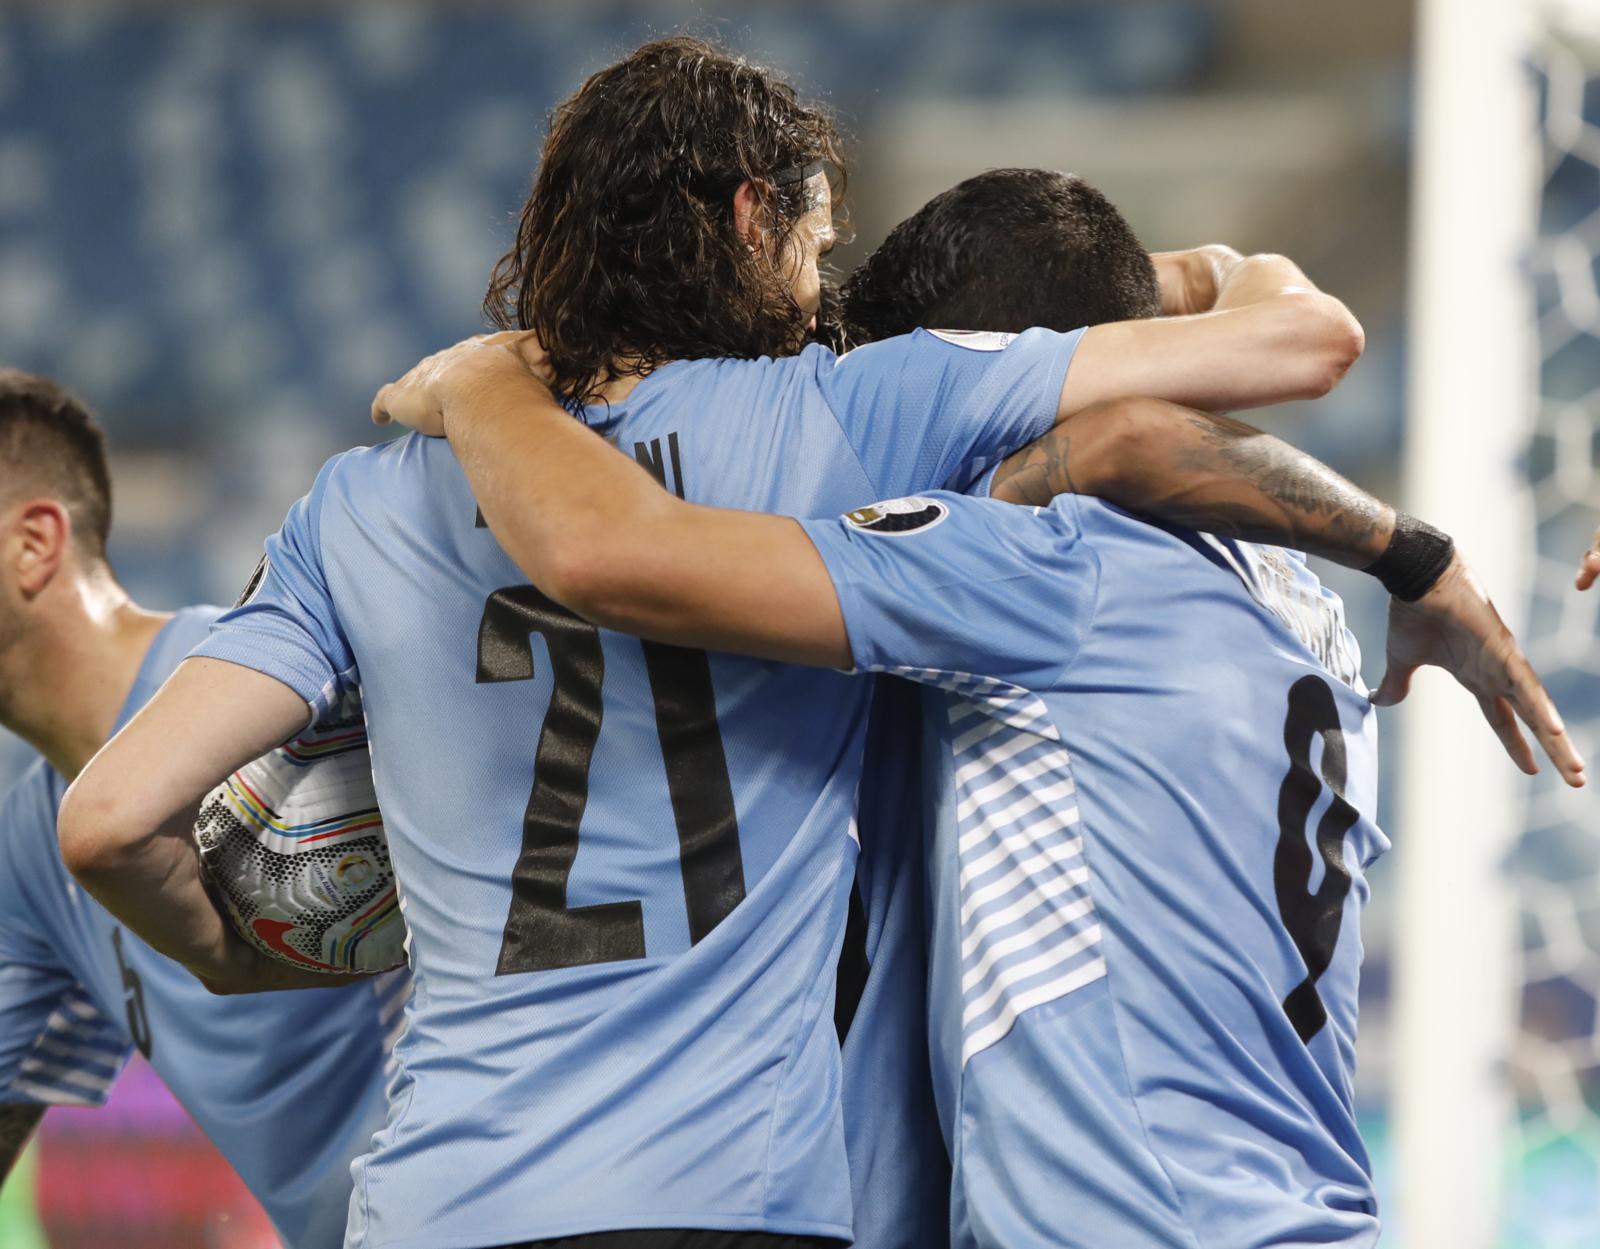 Manchester United star Edinson Cavani played the whole ninety minutes as Uruguay drew 1-1 with Chile in the Copa America.